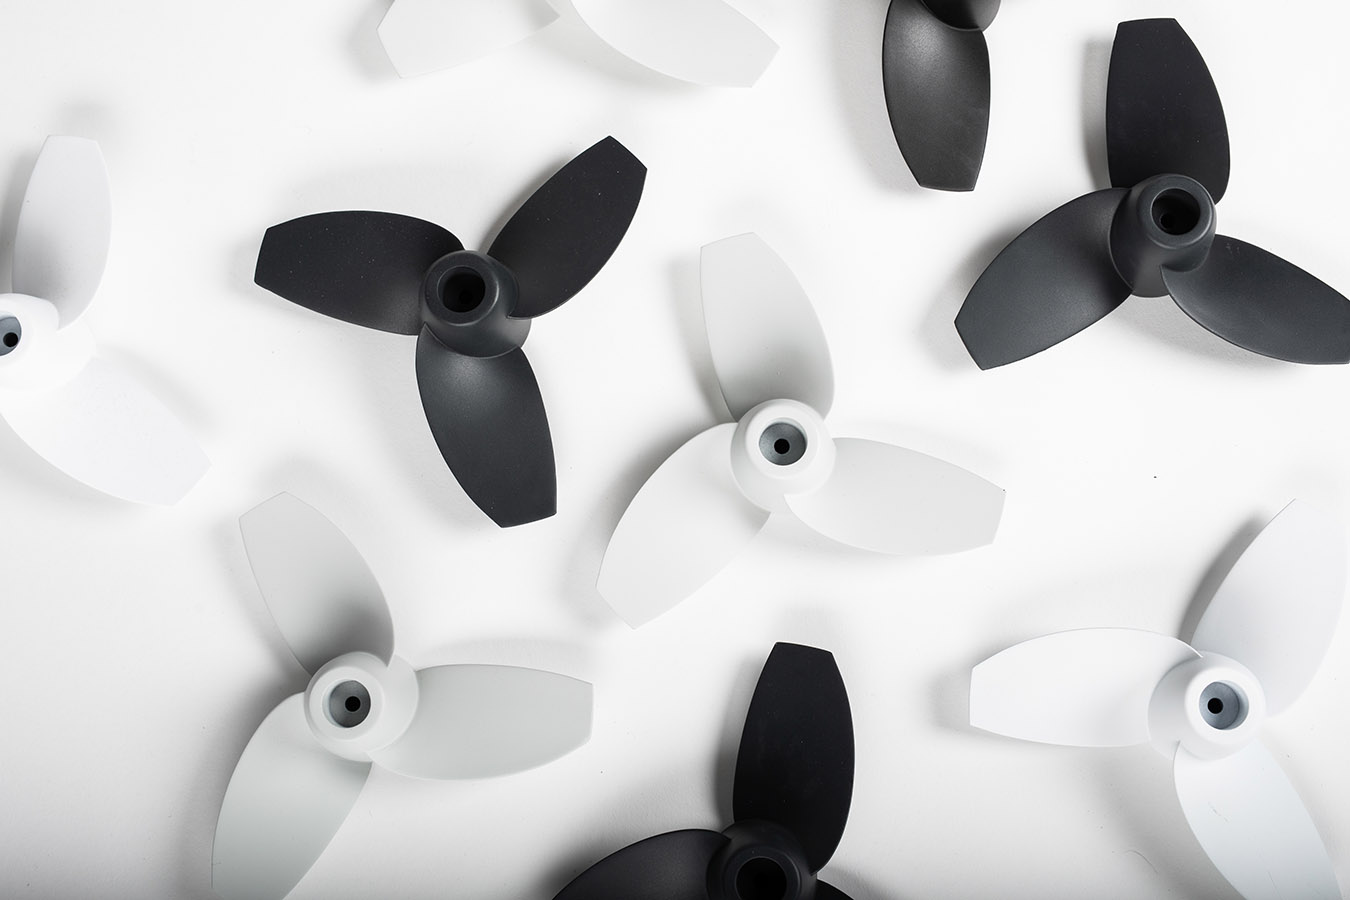 The Asian manufacturer molds the propellers from 30 percent glass-filled nylon. 